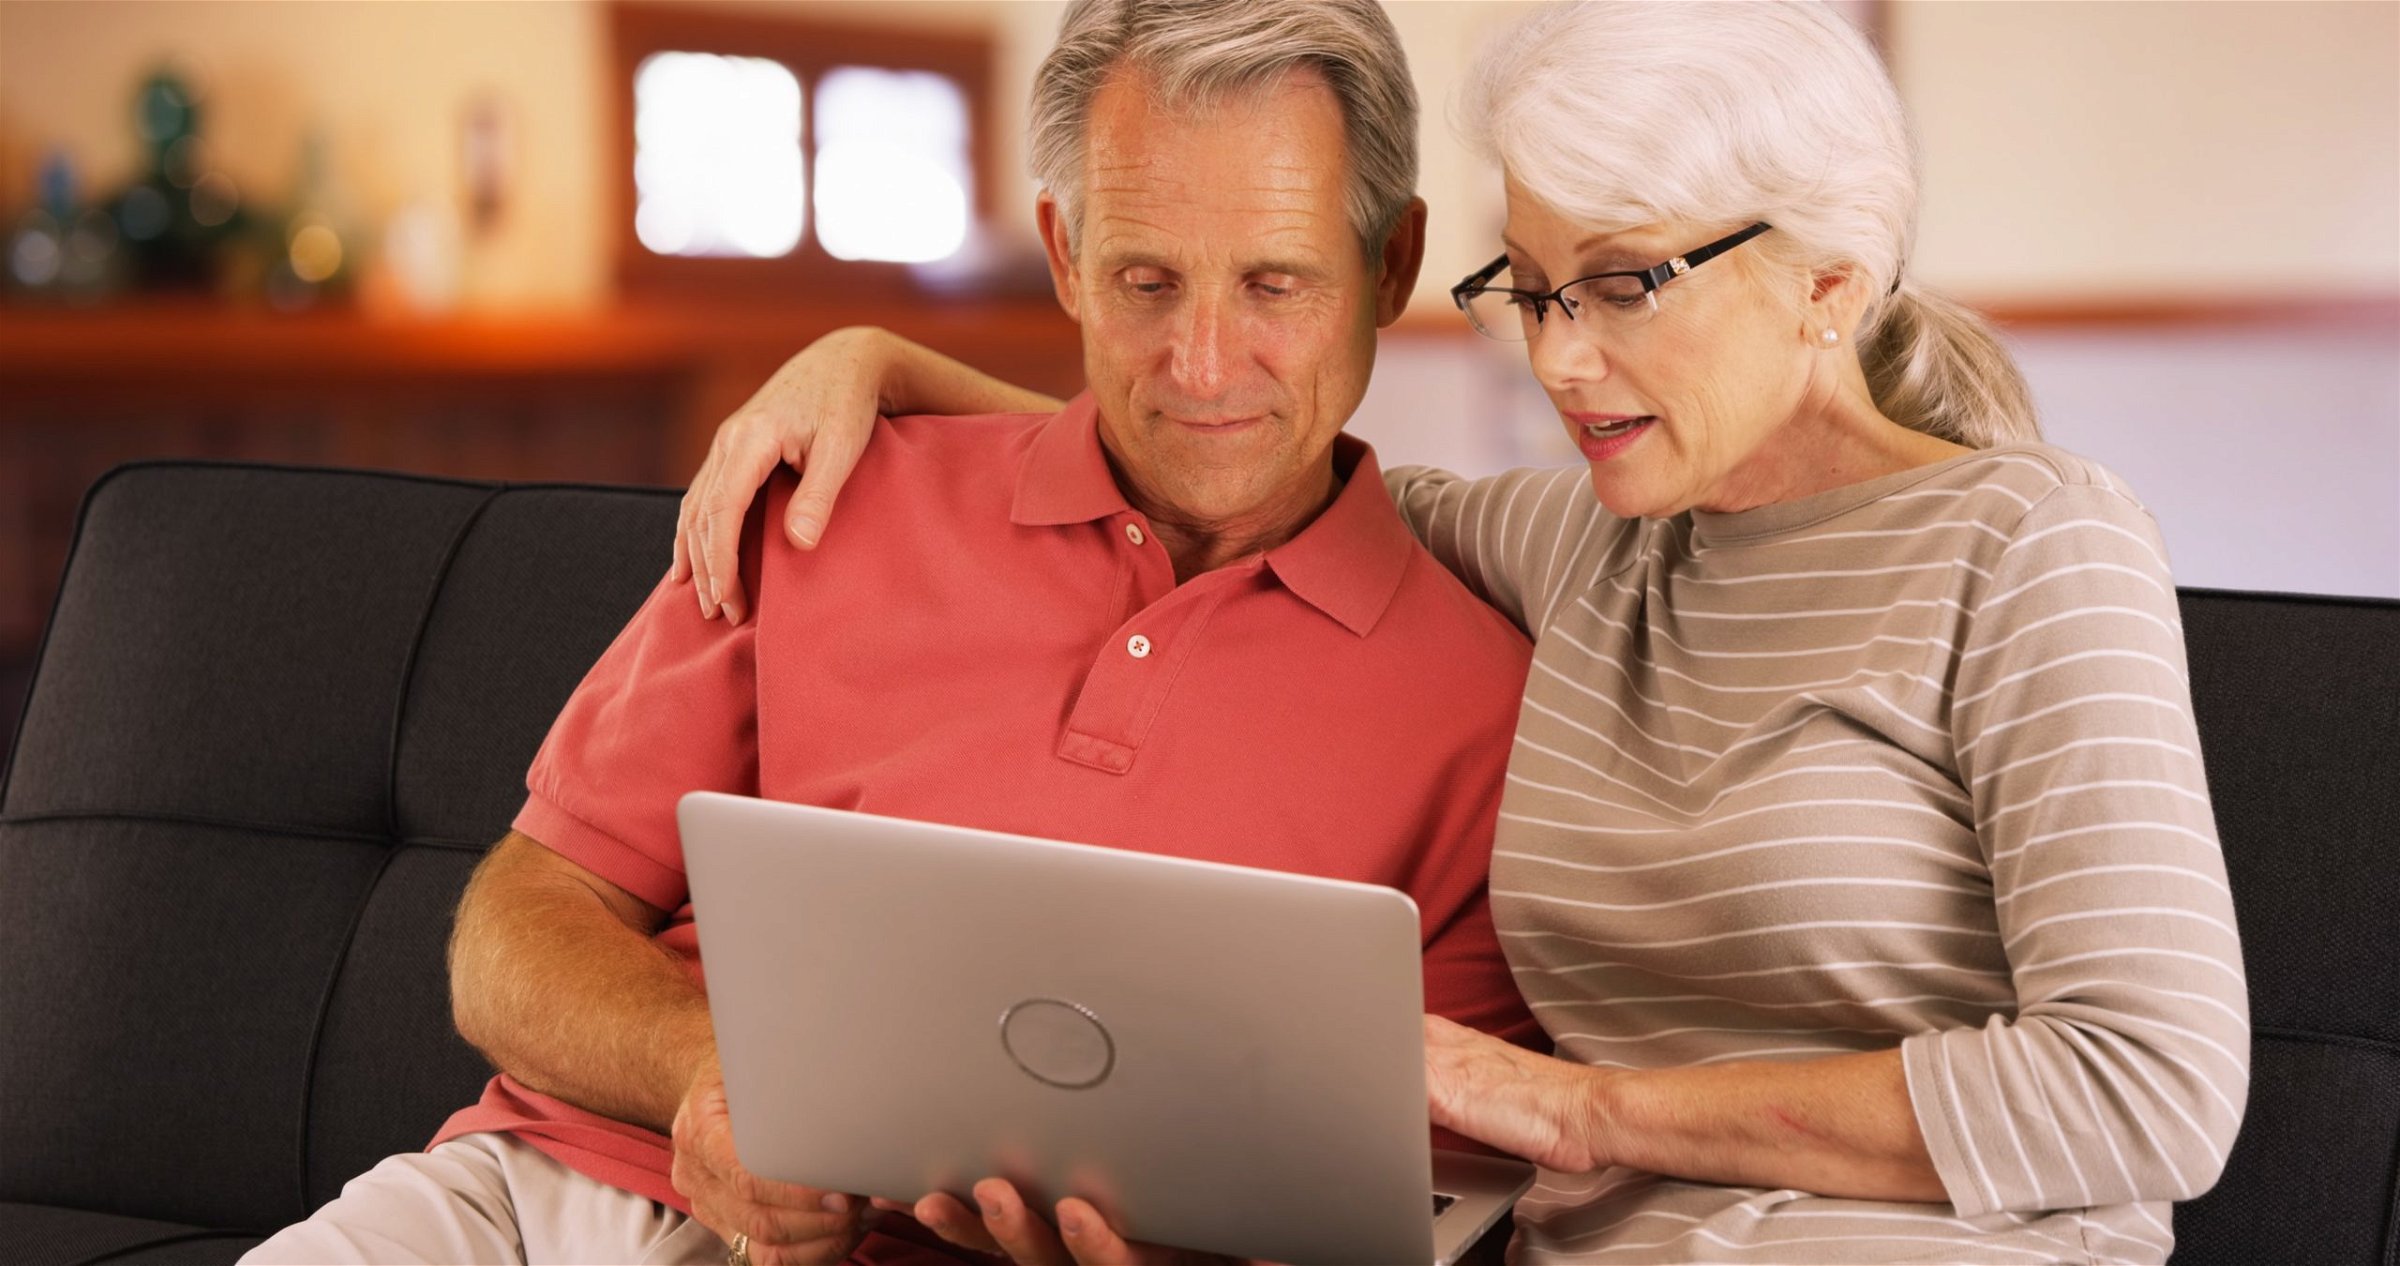 Man and Woman look at computer together